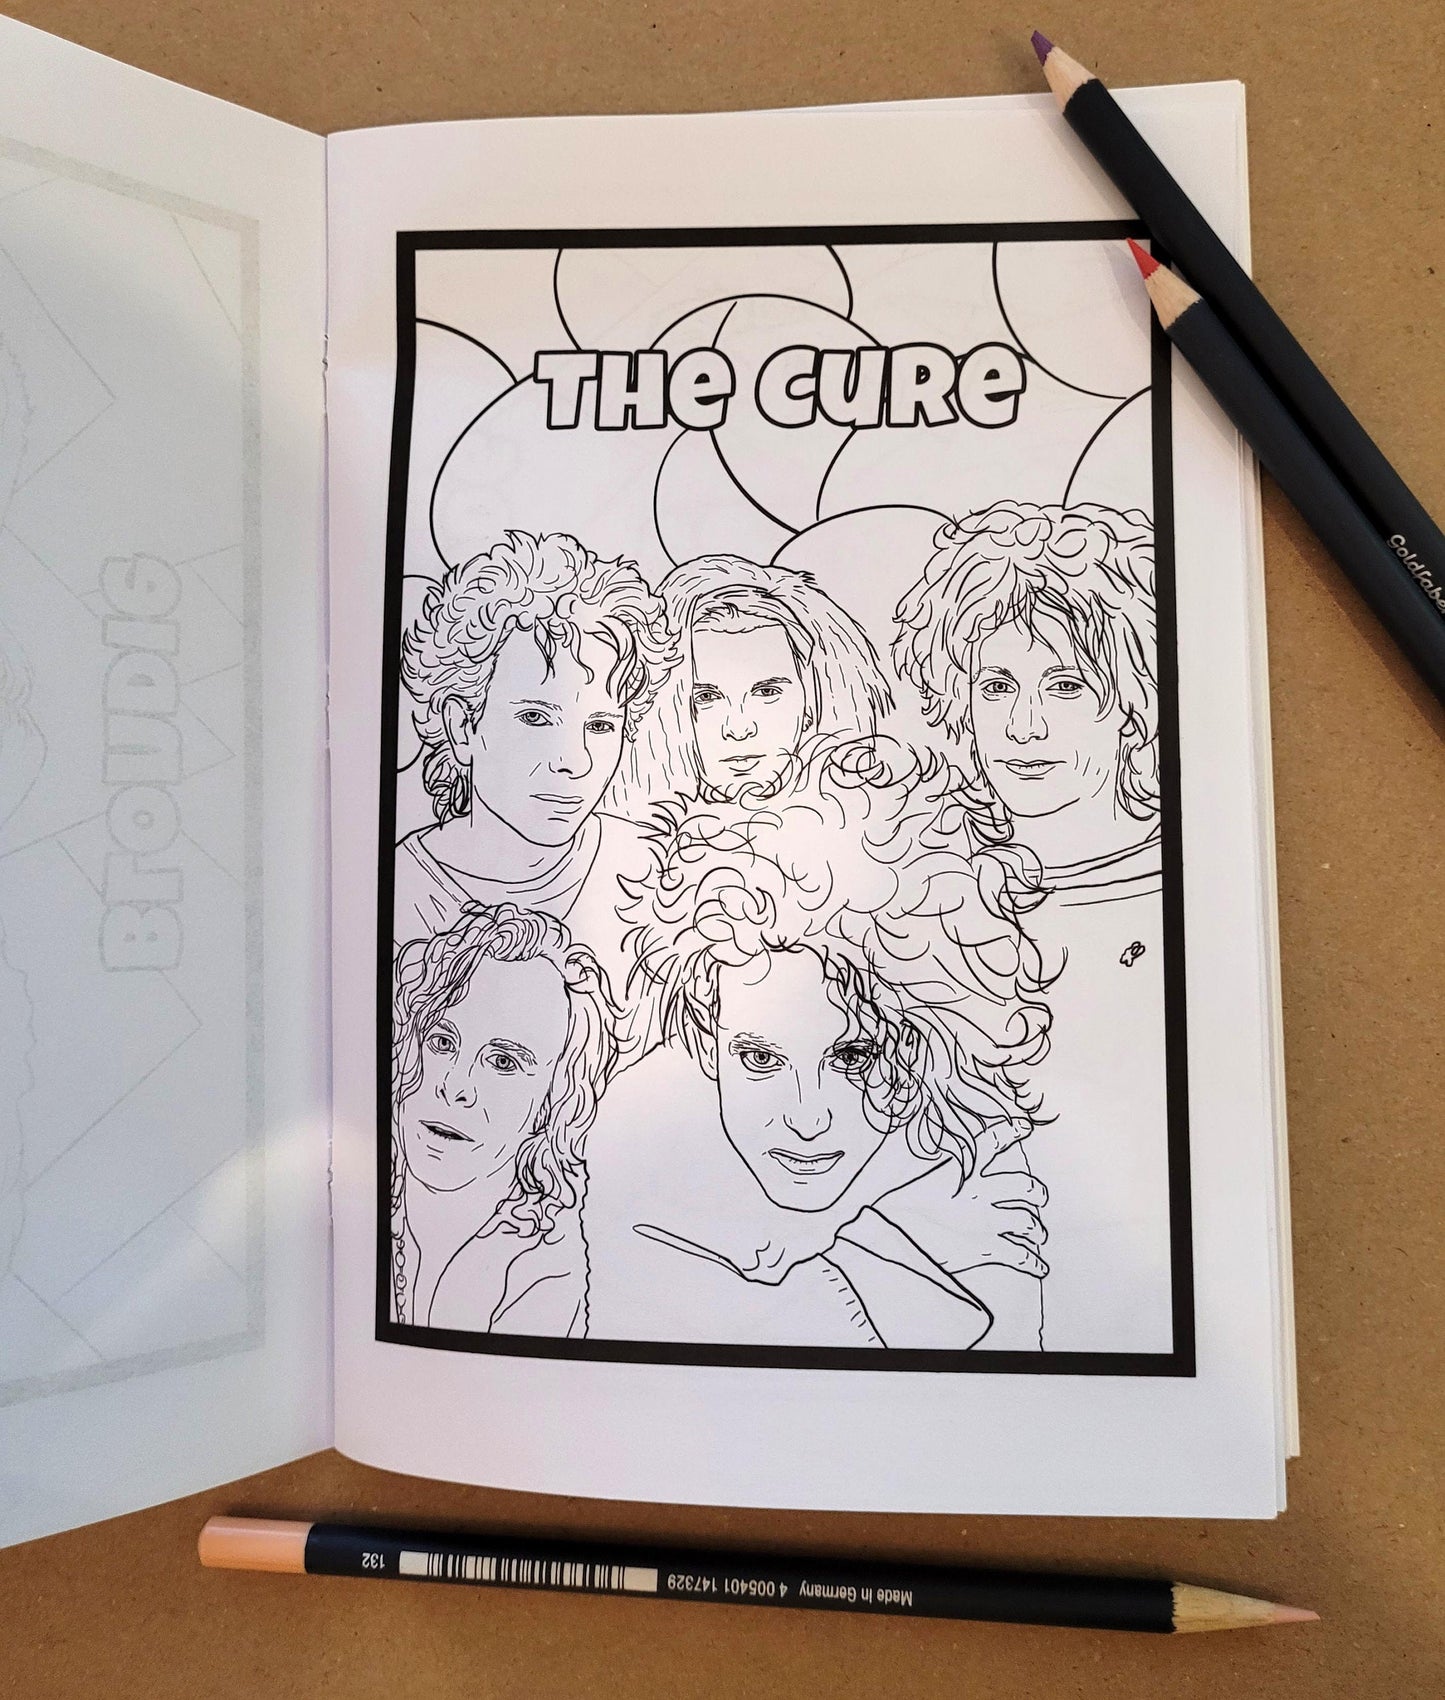 New Wave Colouring Book, adult colouring book, gift for new wave music fan, activity book, birthday gift, 80s music colouring book